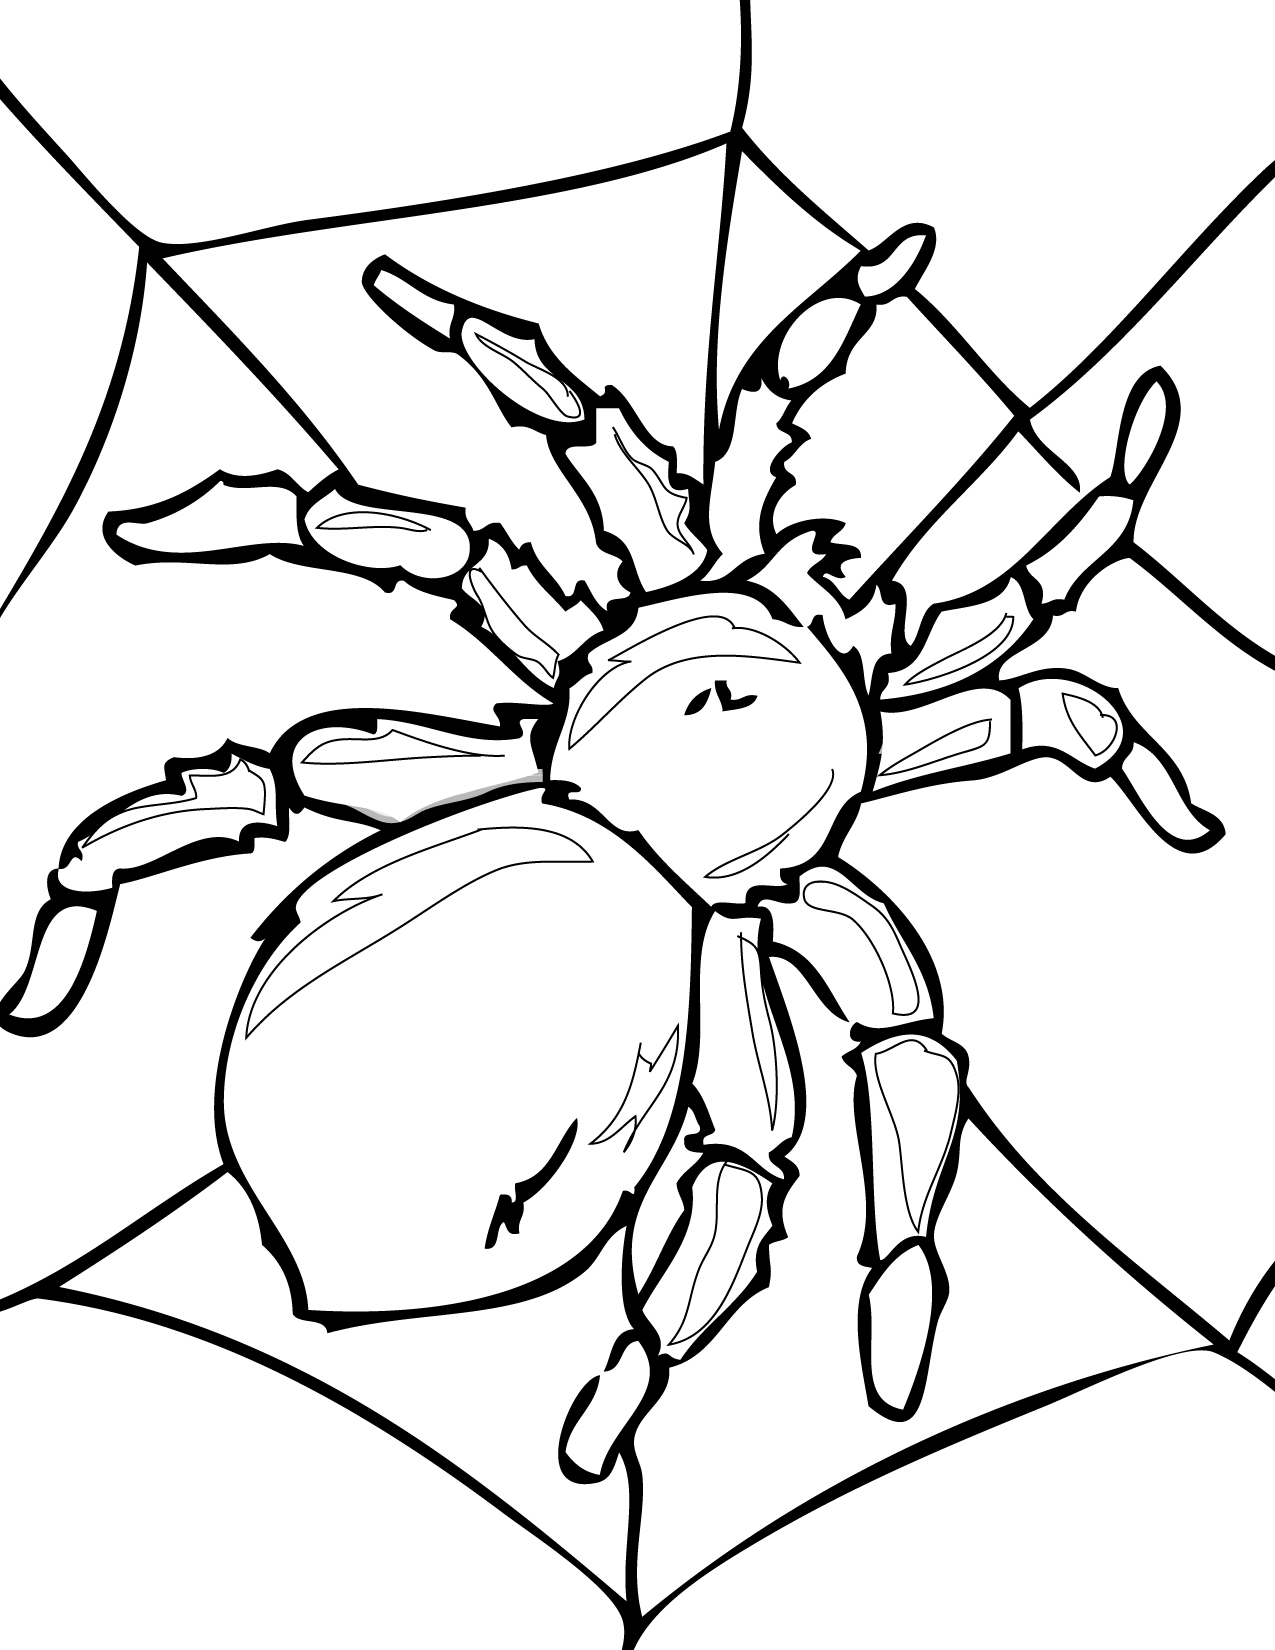 Spider Coloring in Pages 7